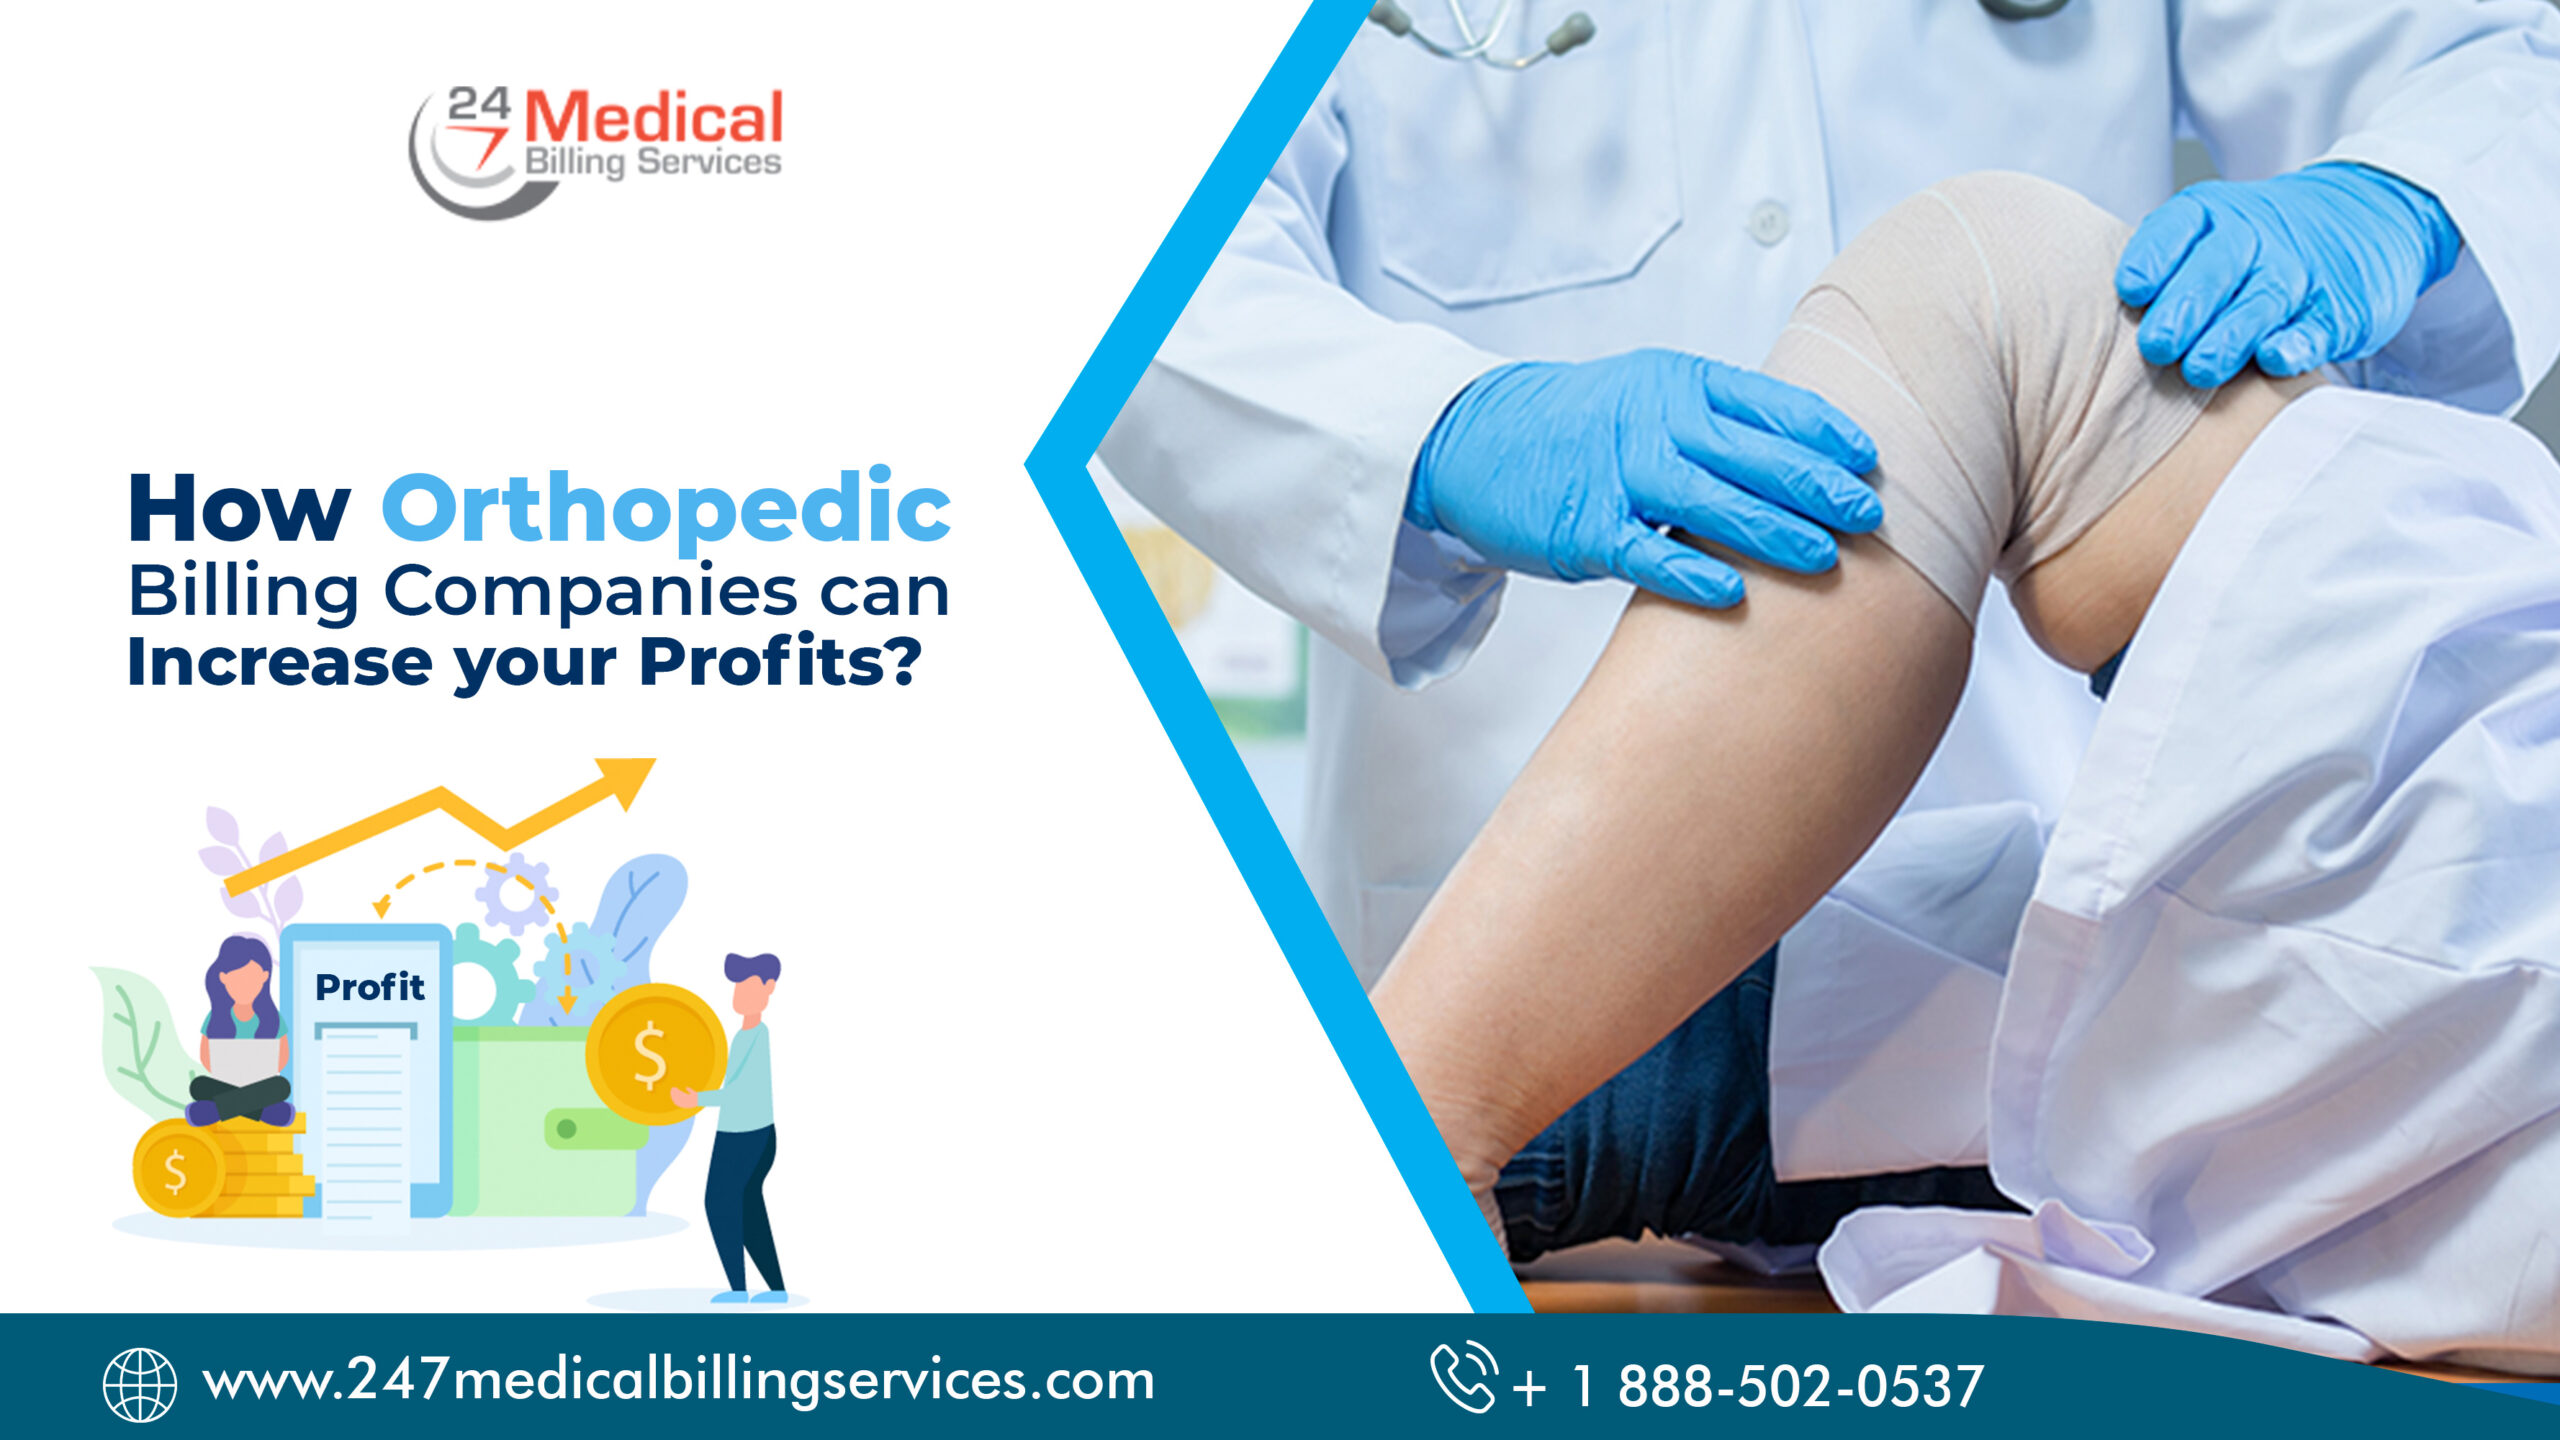  How orthopedic billing companies can increase your profits?